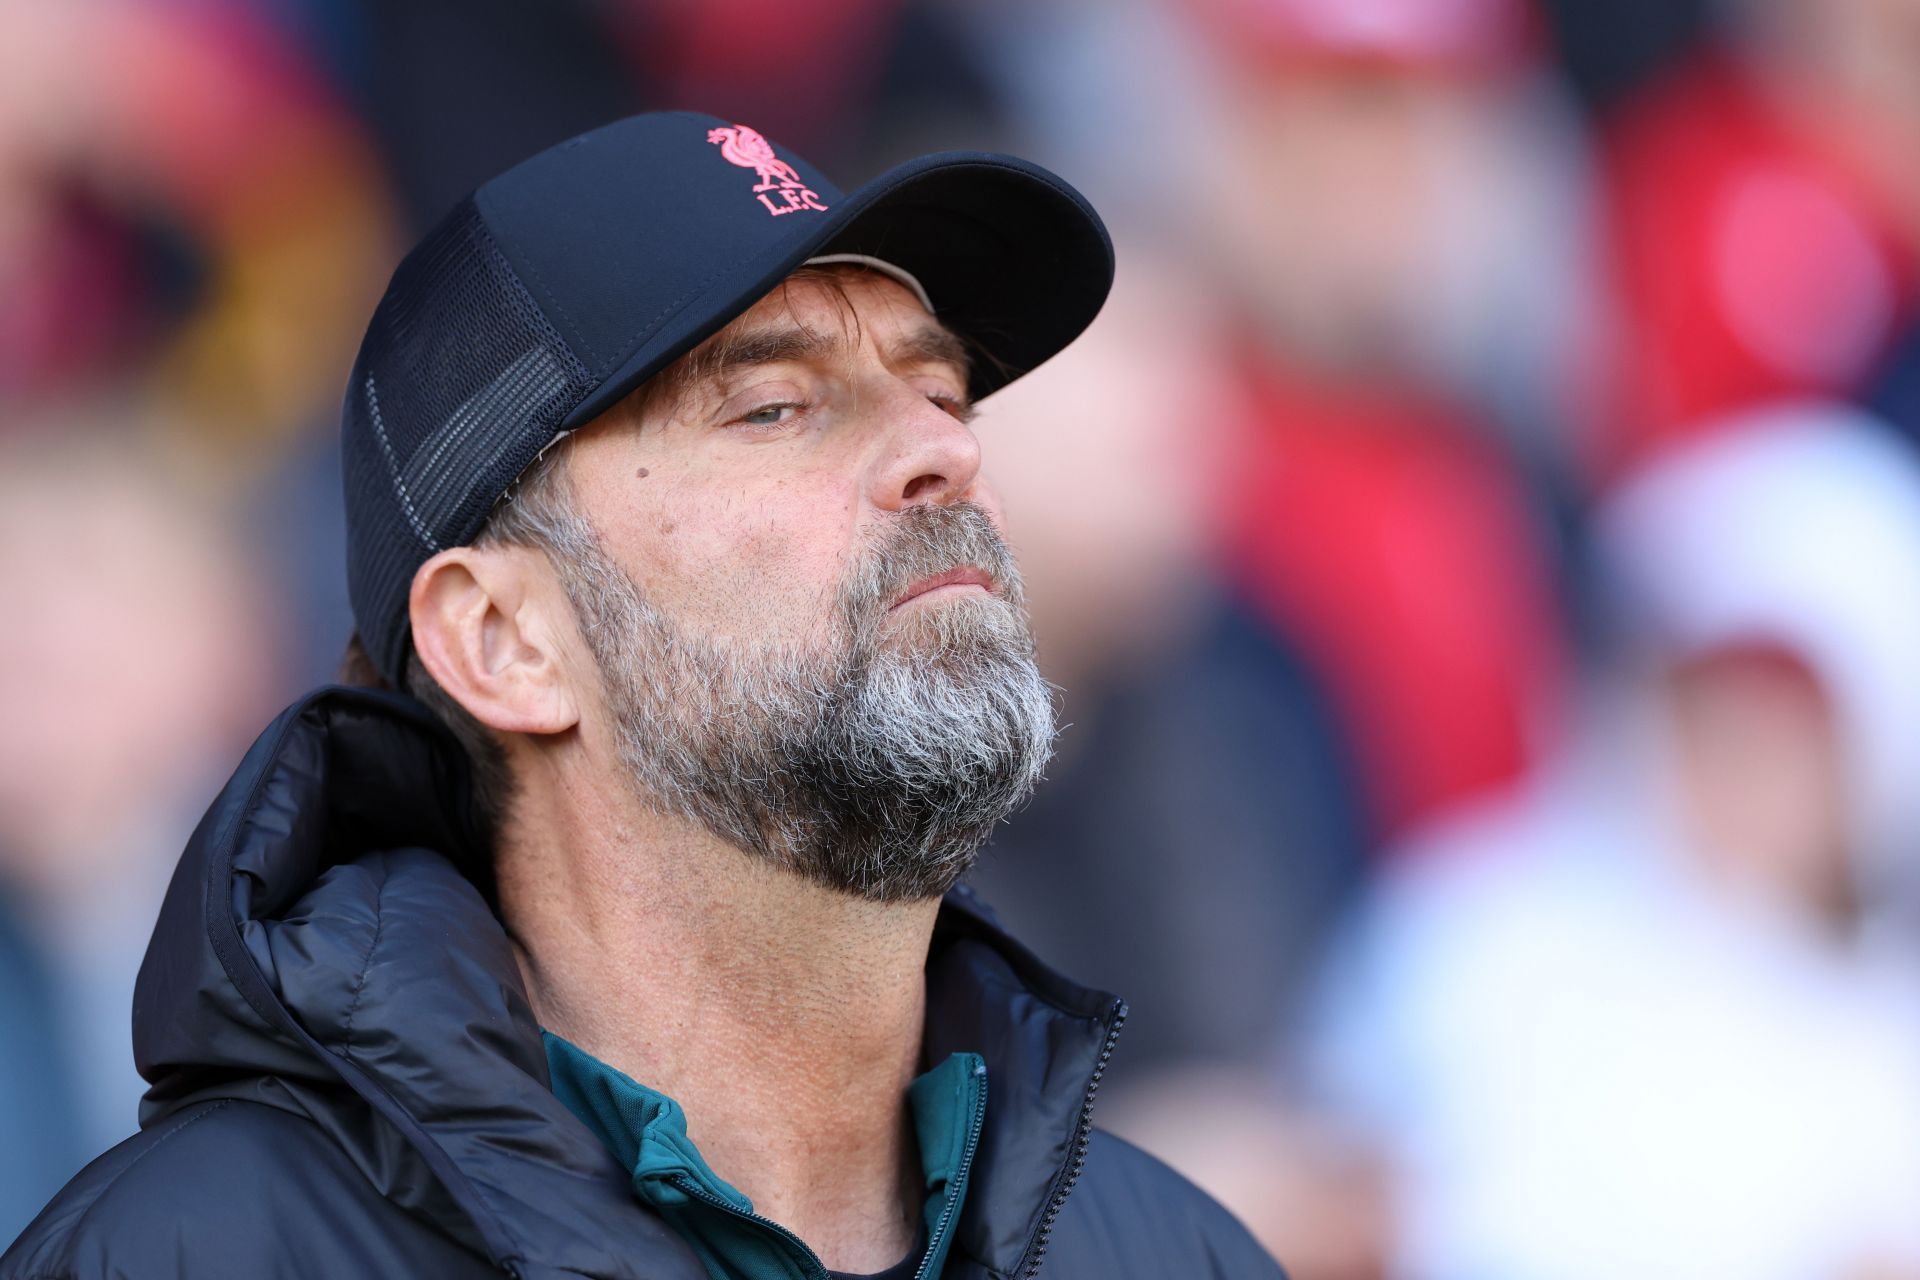 Klopp may be pondering his future according to Merson.